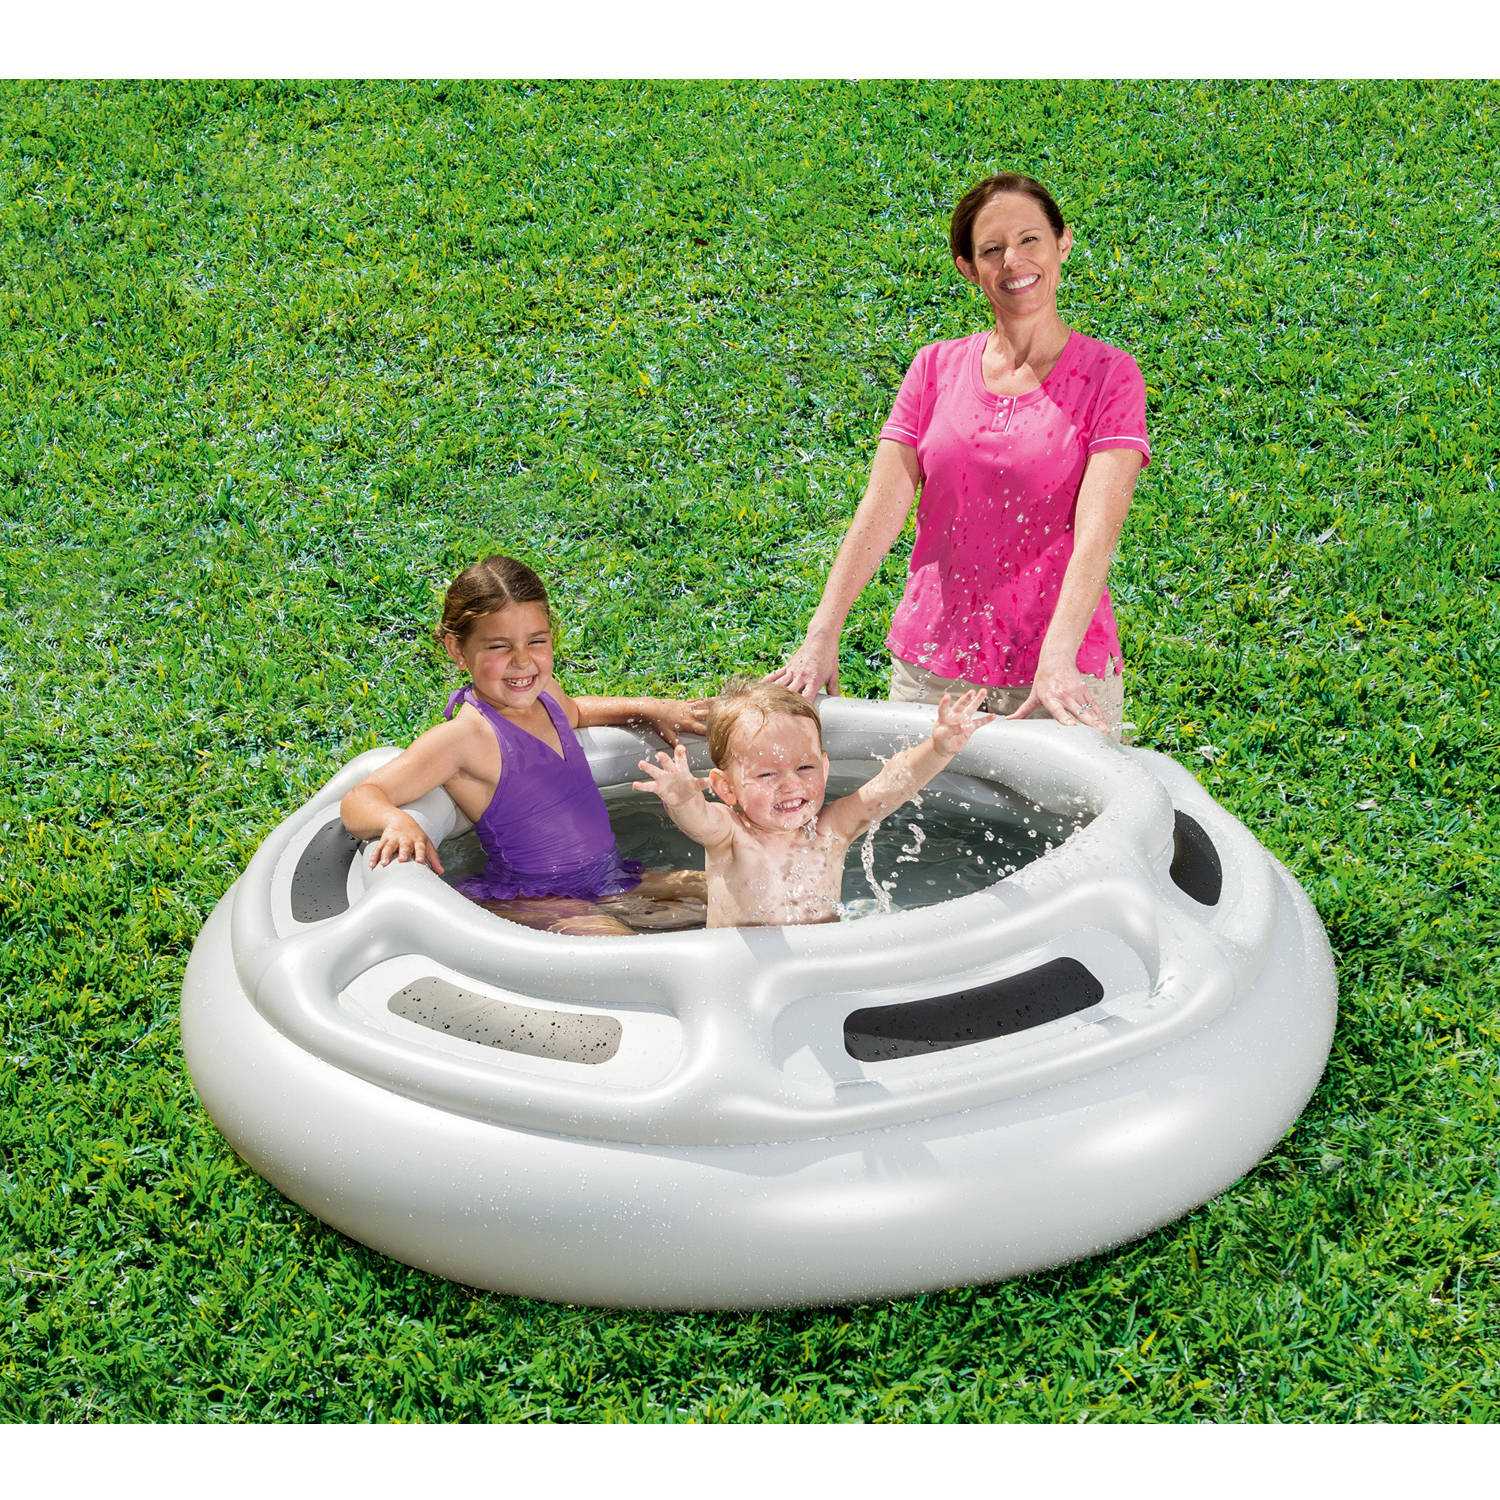 H2OGO! Outer Space Inflatable Pool - image 1 of 7